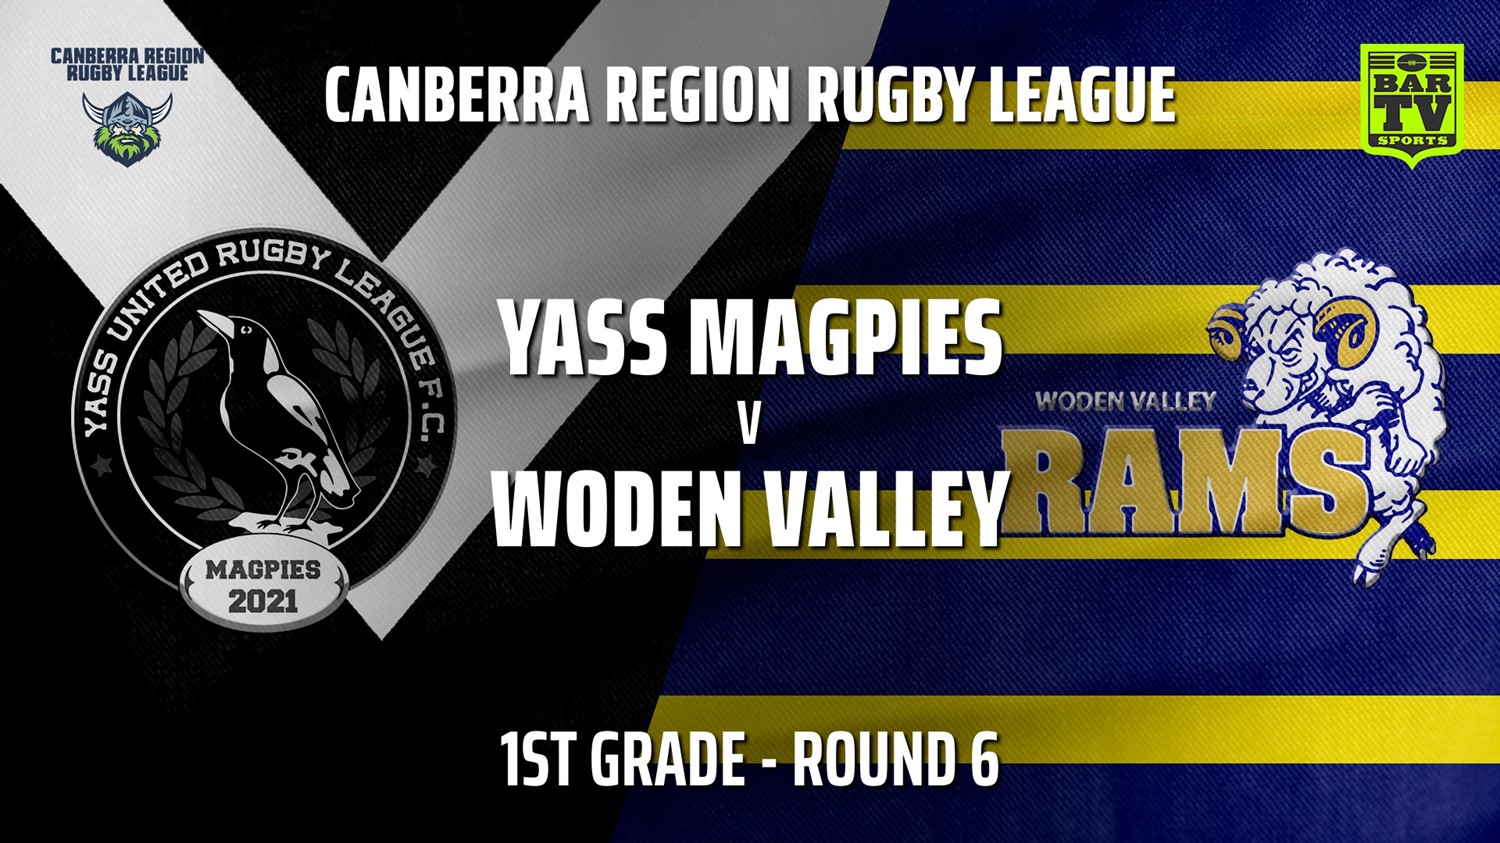 210522-CRRL Round 6 - 1st Grade - Yass Magpies v Woden Valley Rams Slate Image